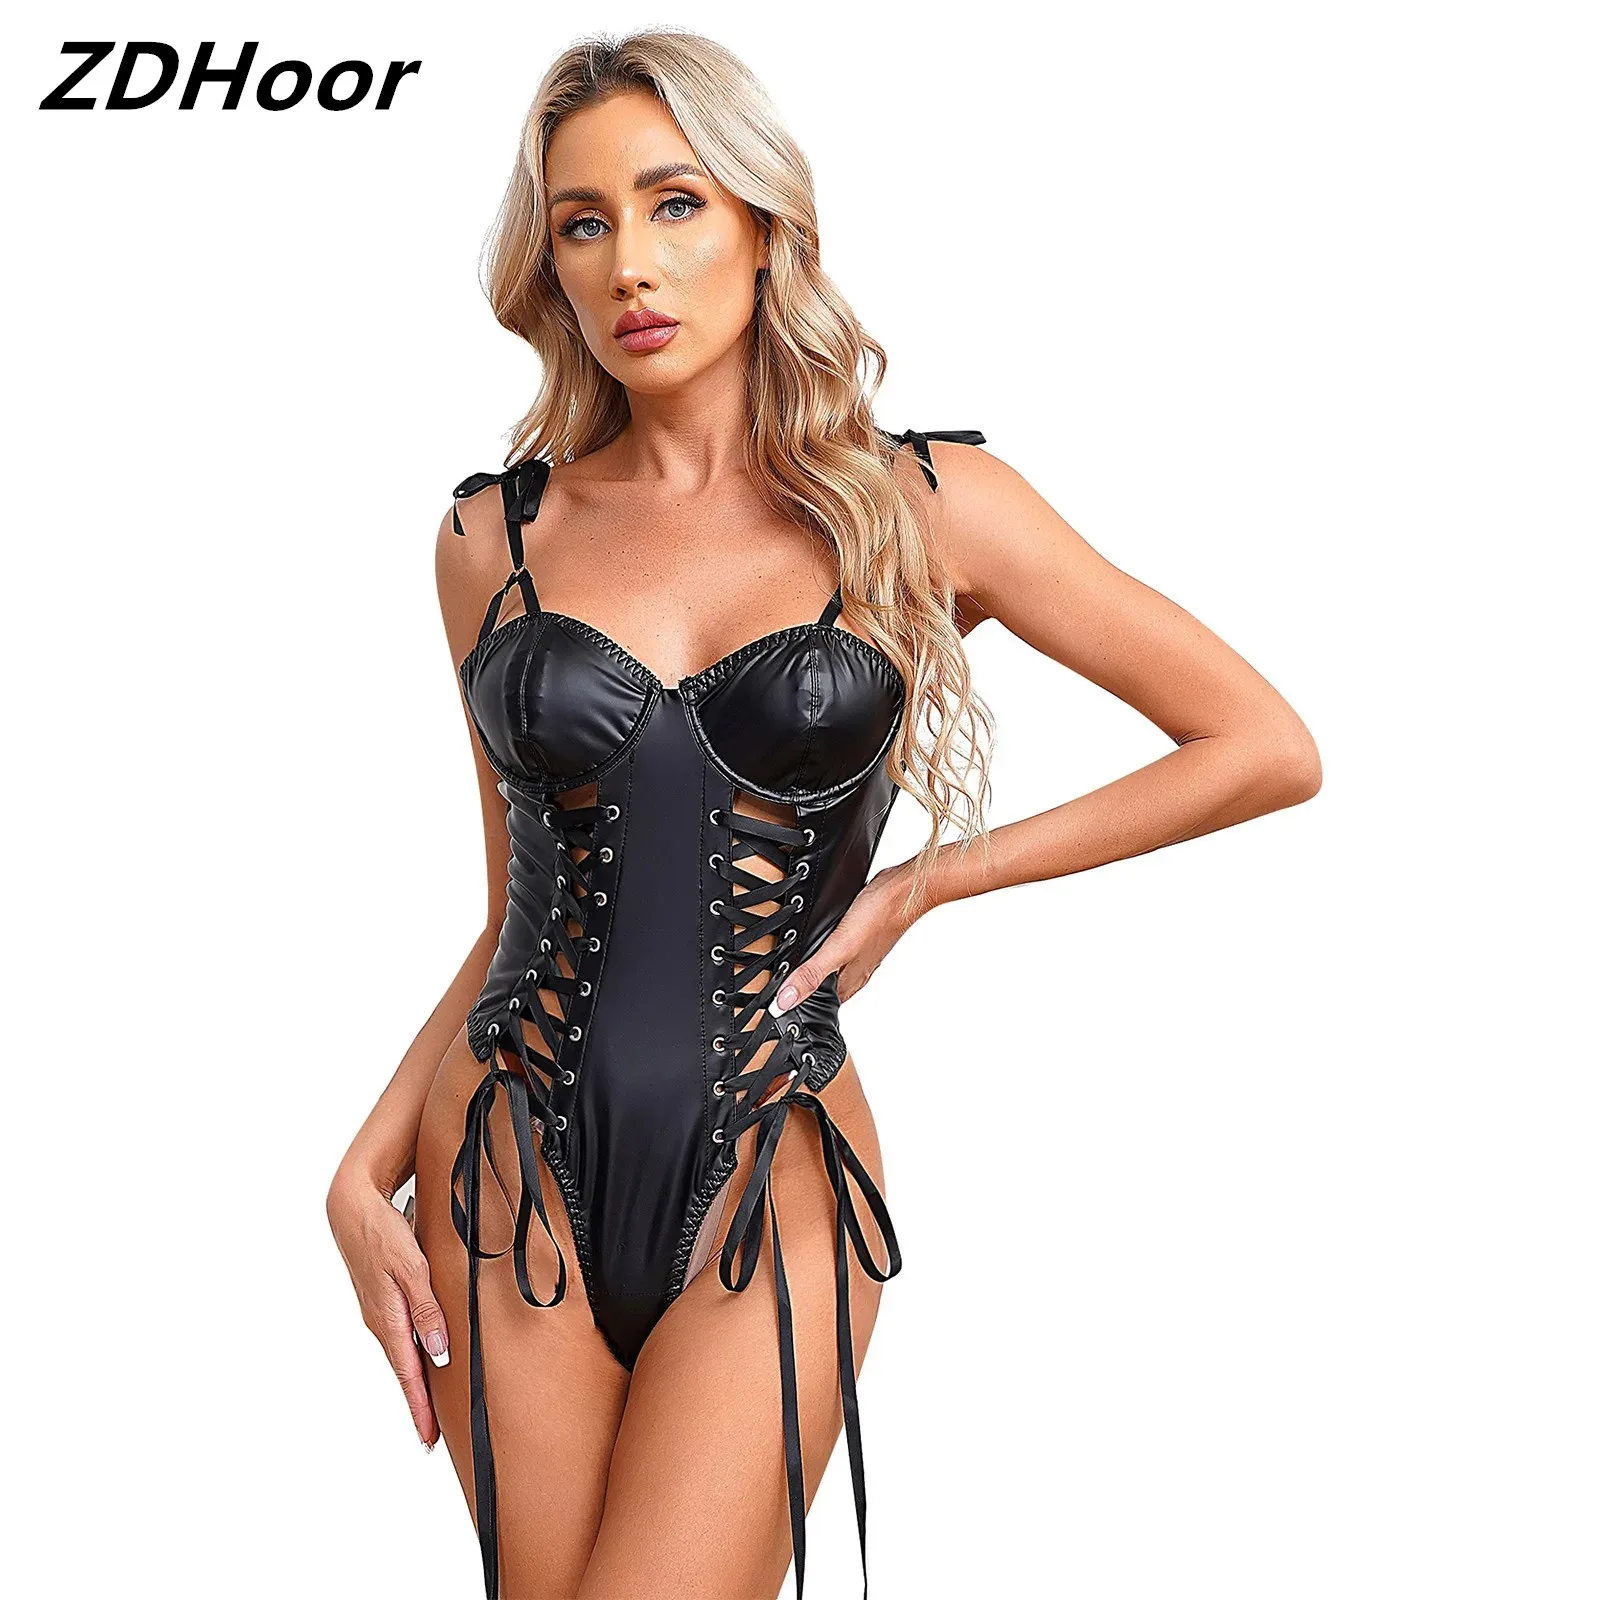 

Womens Hollow Out Crisscross Lace-up Bodysuit High Cut PU Leather Catsuit Sheer Mesh Patchwork Back Leotard Clubwear